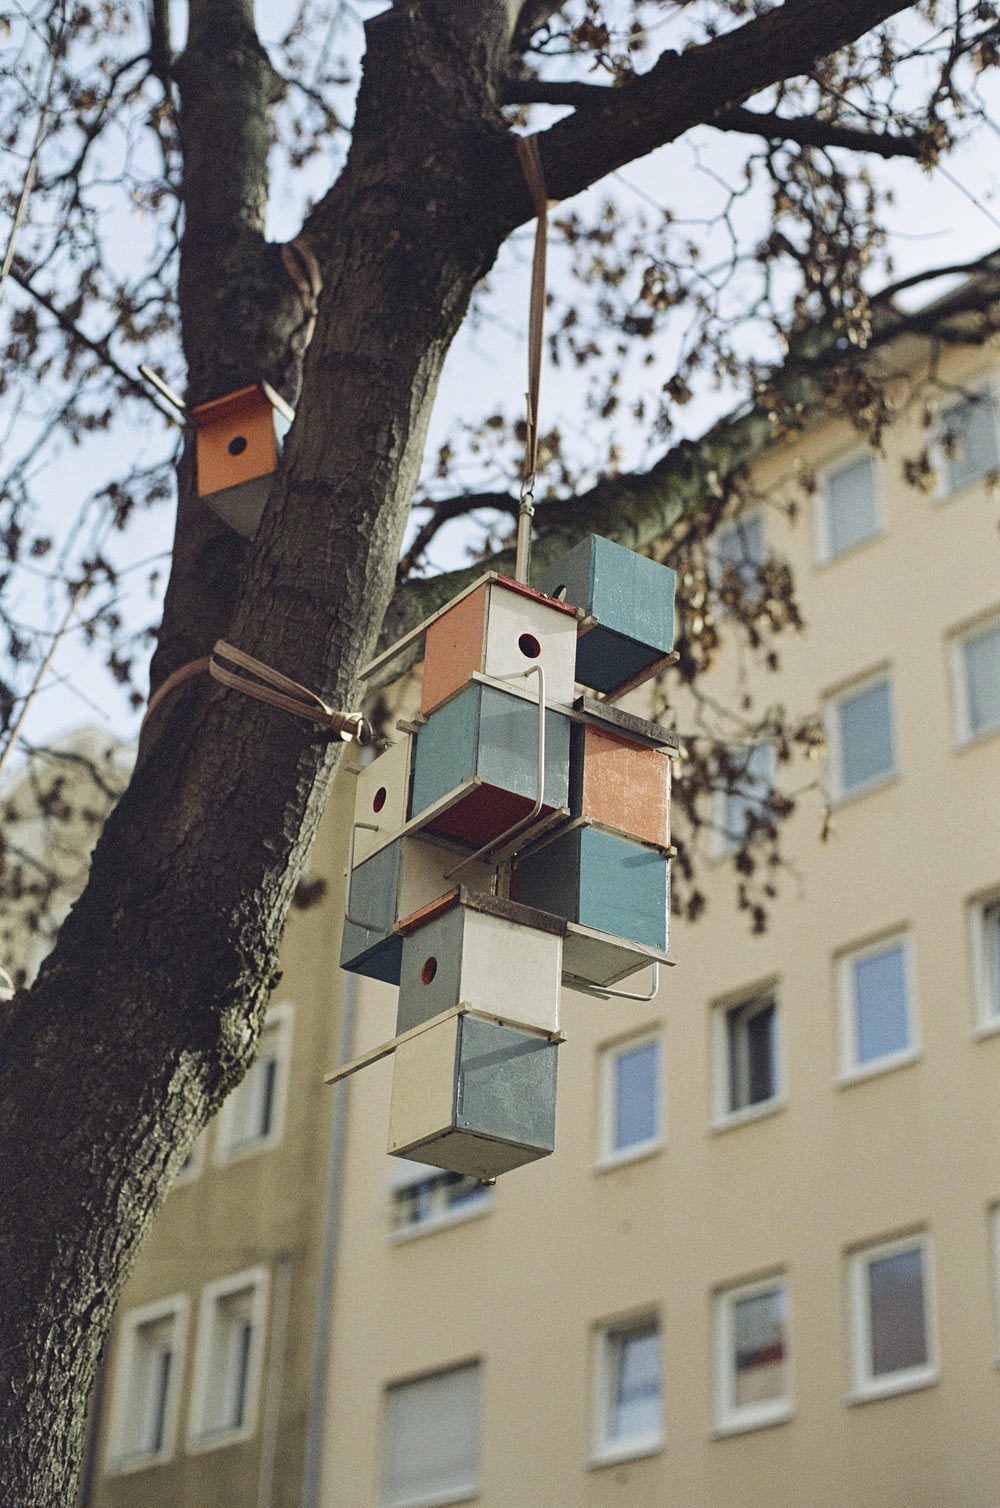 a bird house hanging from a tree in front of a building